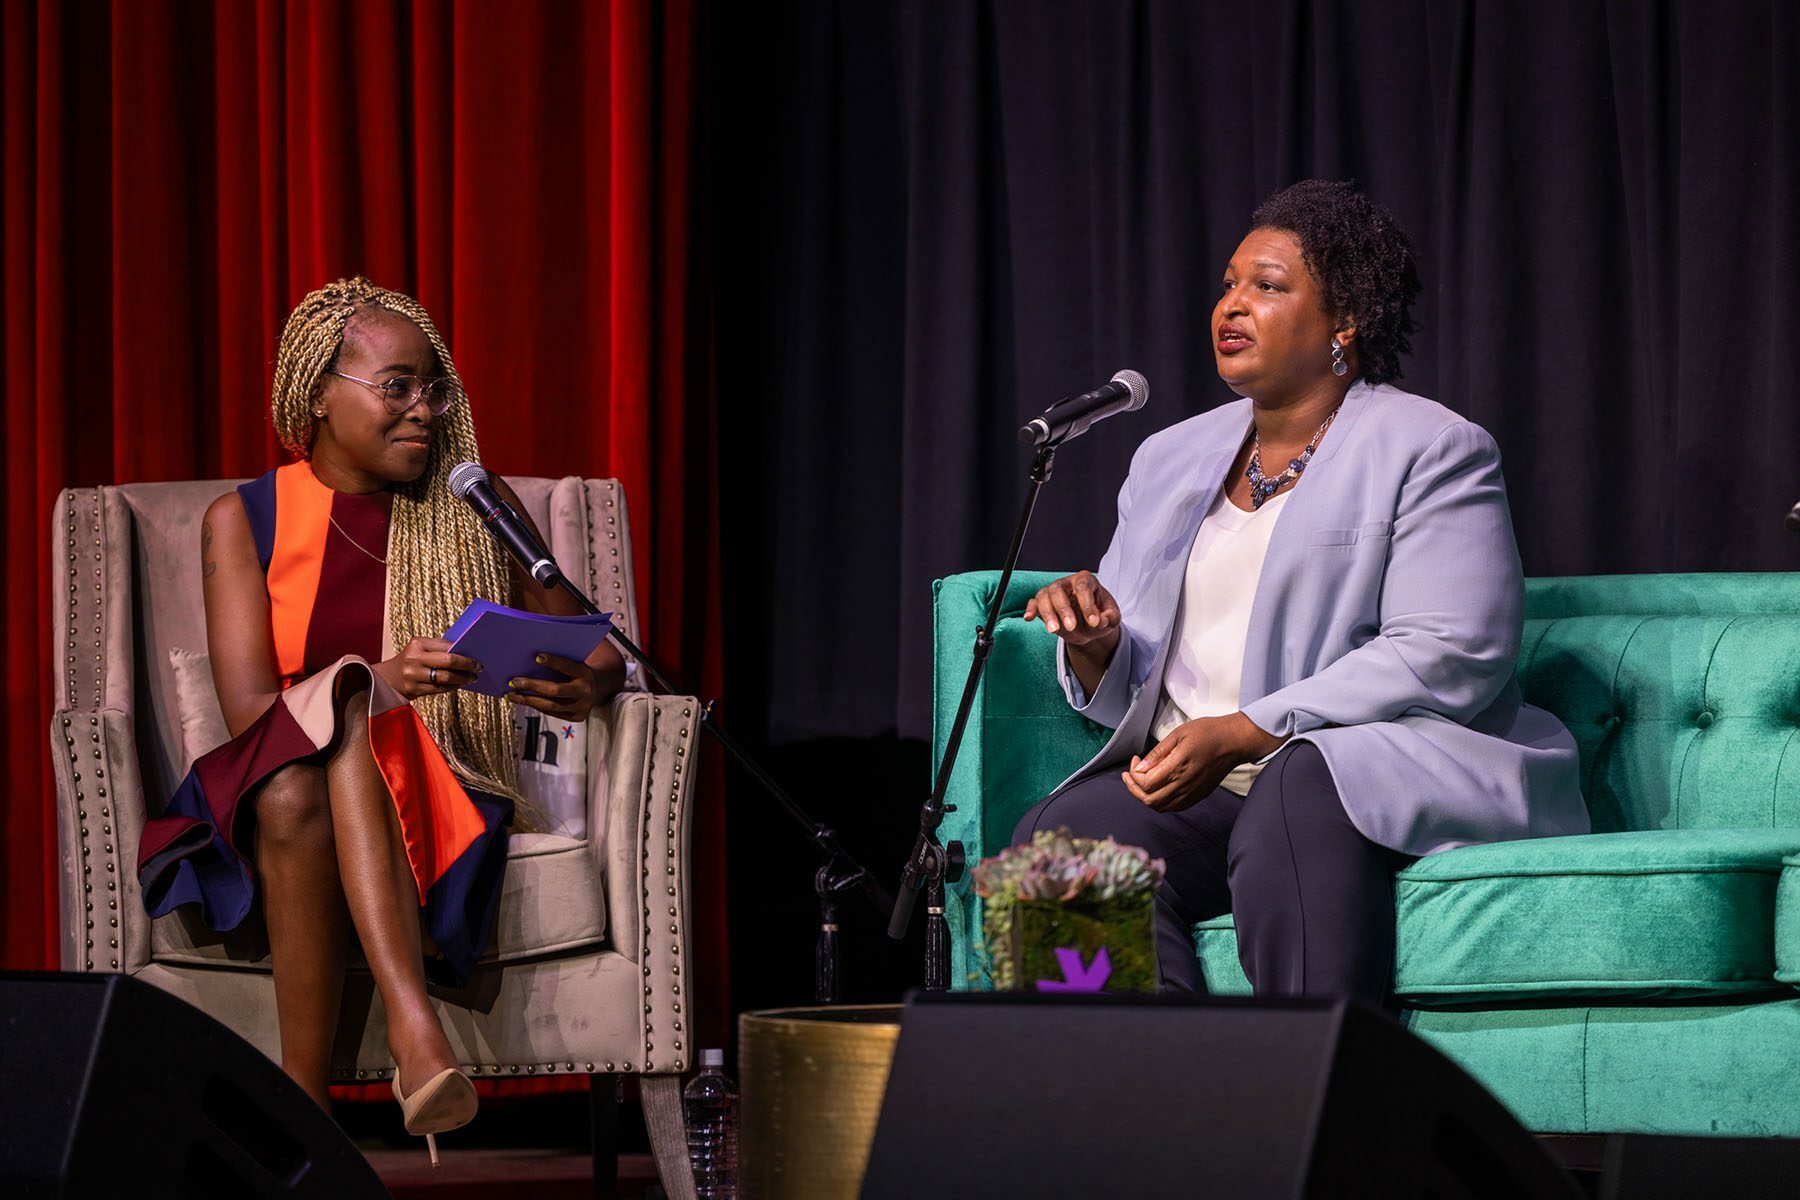 Stacey Abrams speaks to journalist Errin Haines on stage during a 19th event in Atlanta.